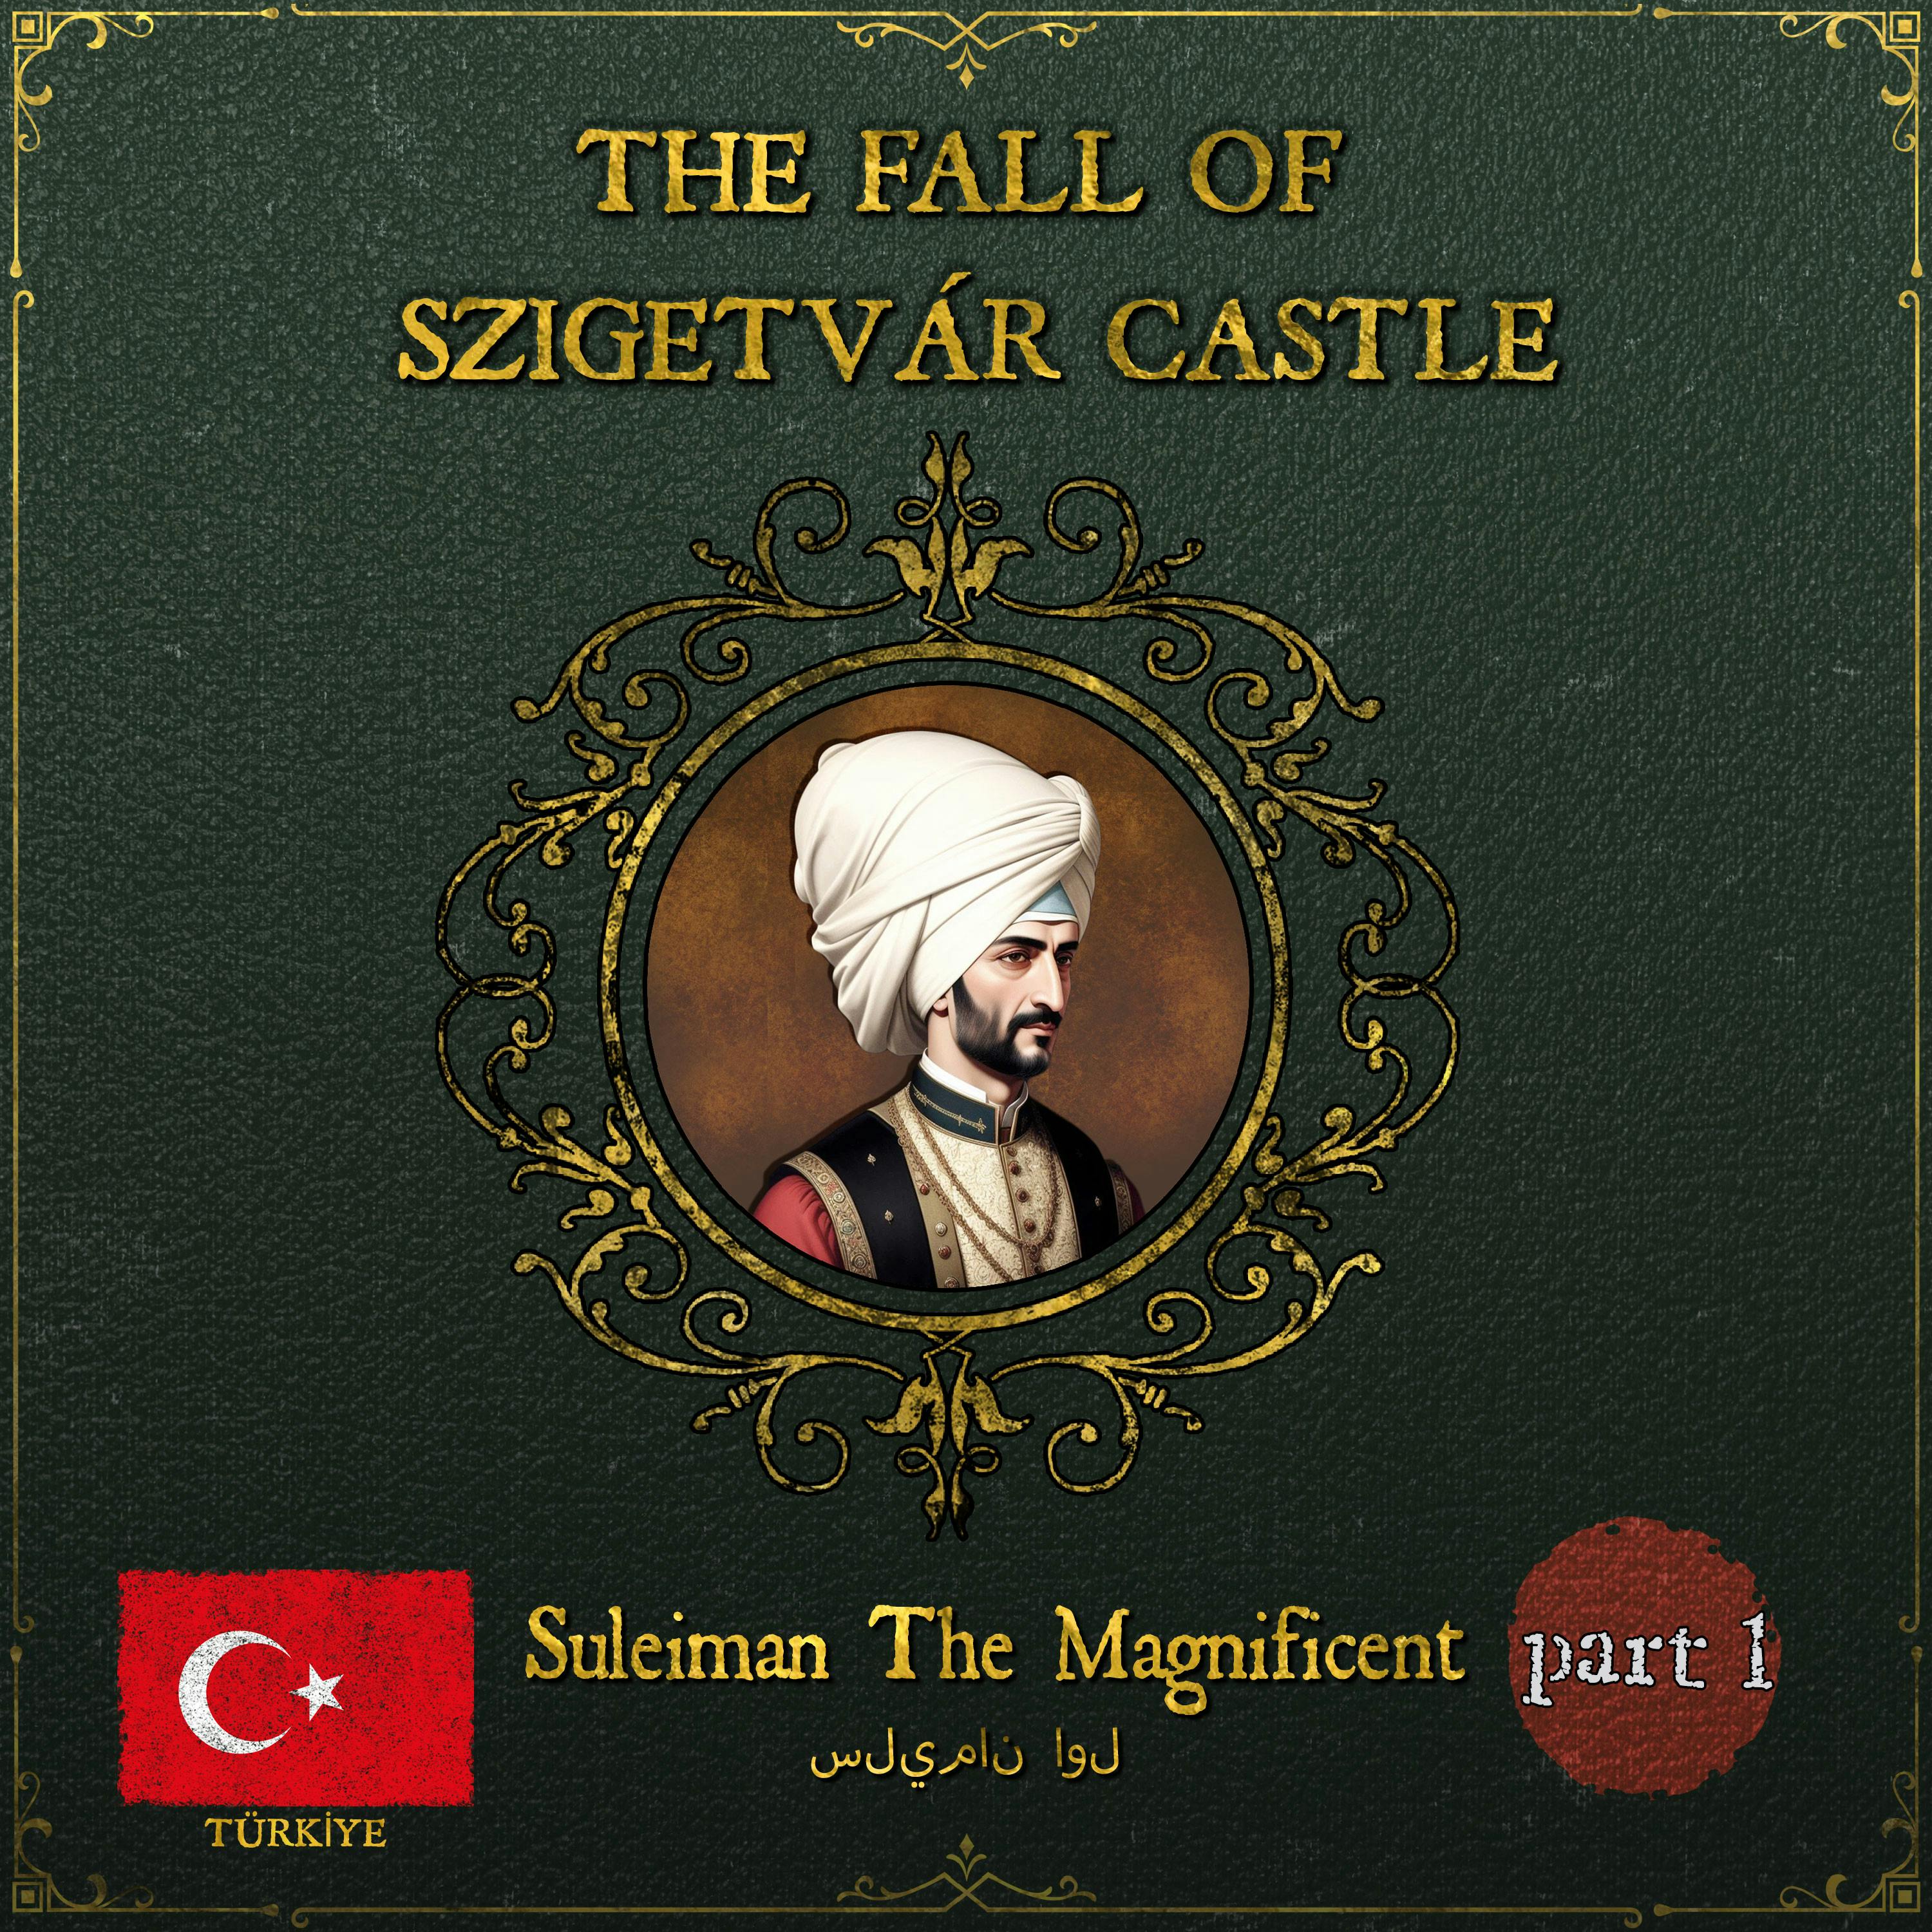 The Fall Of Szigetvár (1566) | Part 1: Suleiman’s Last March